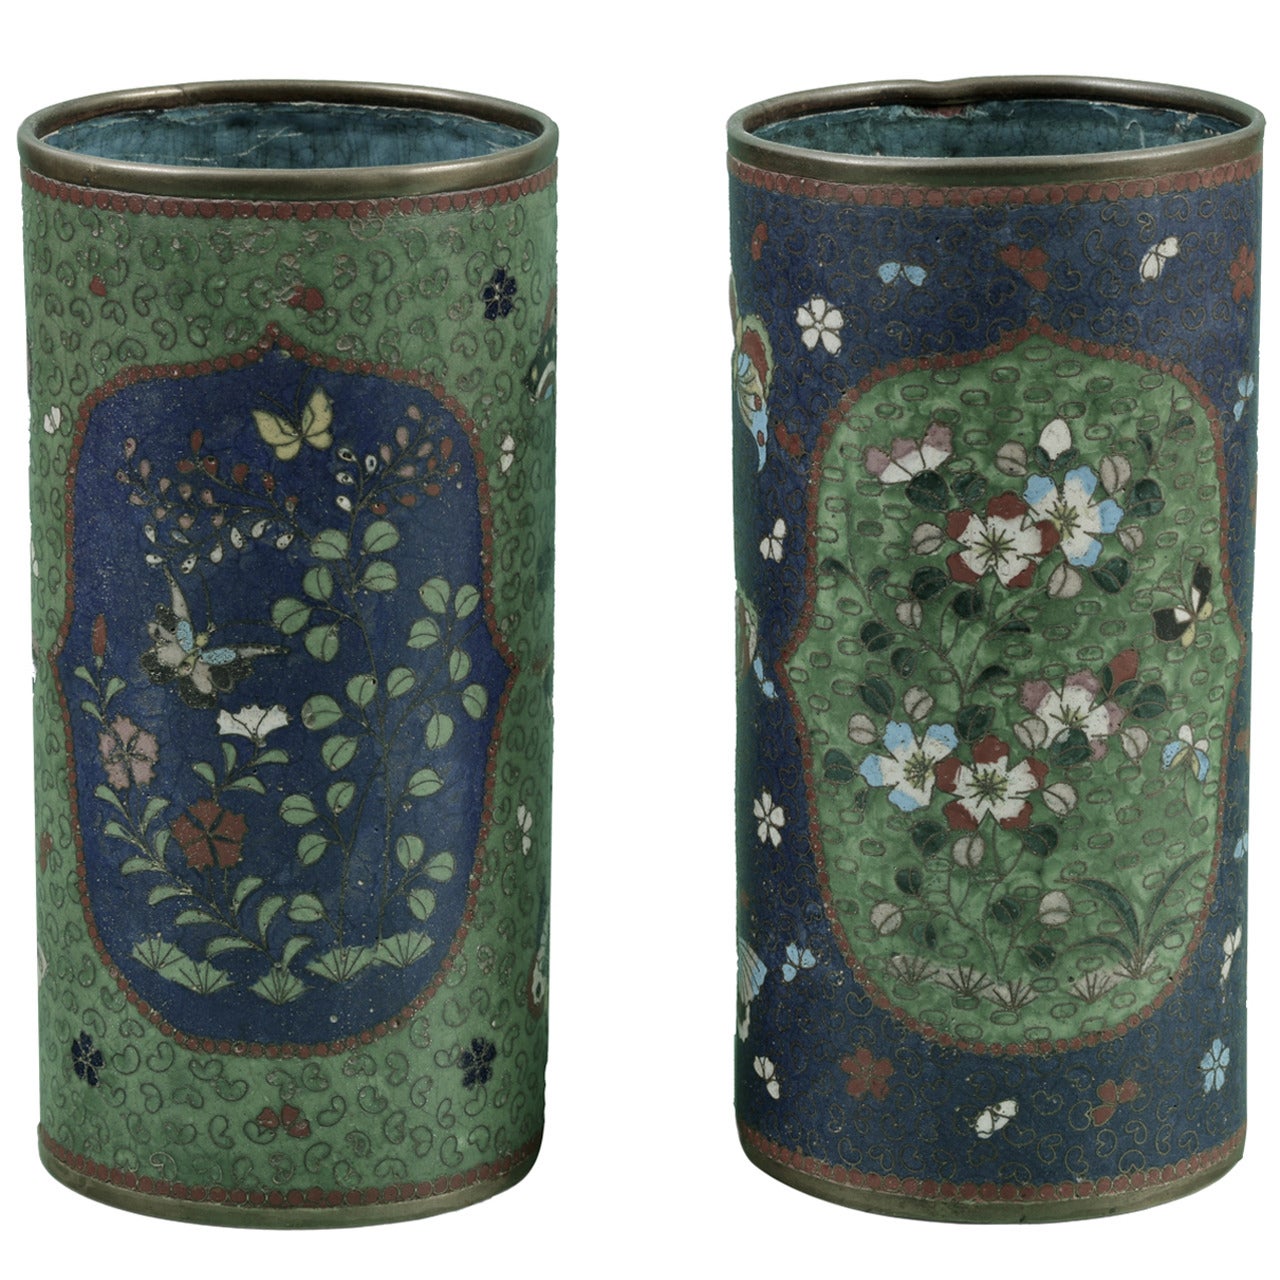 Chinese Cloisonné Vases